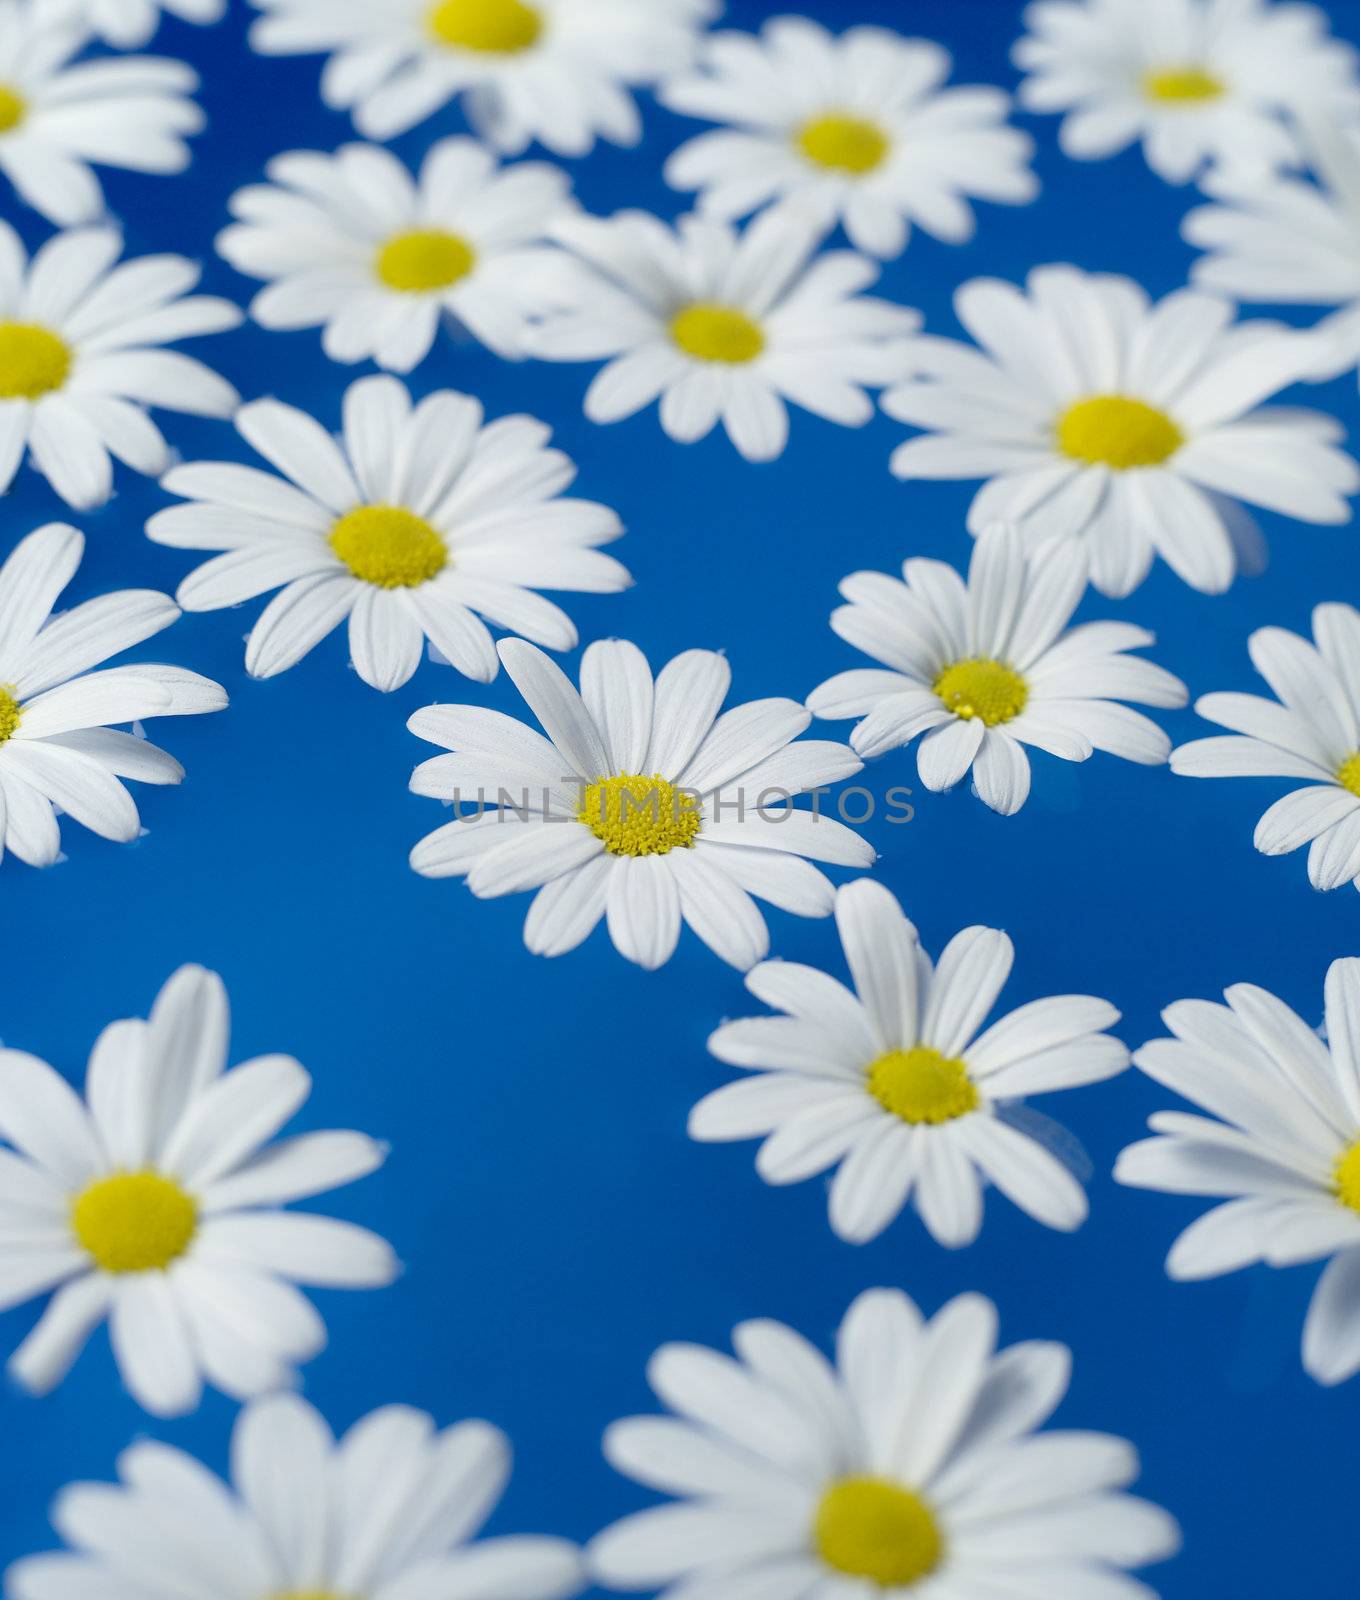 Group of Oxeye Daisy on blue background